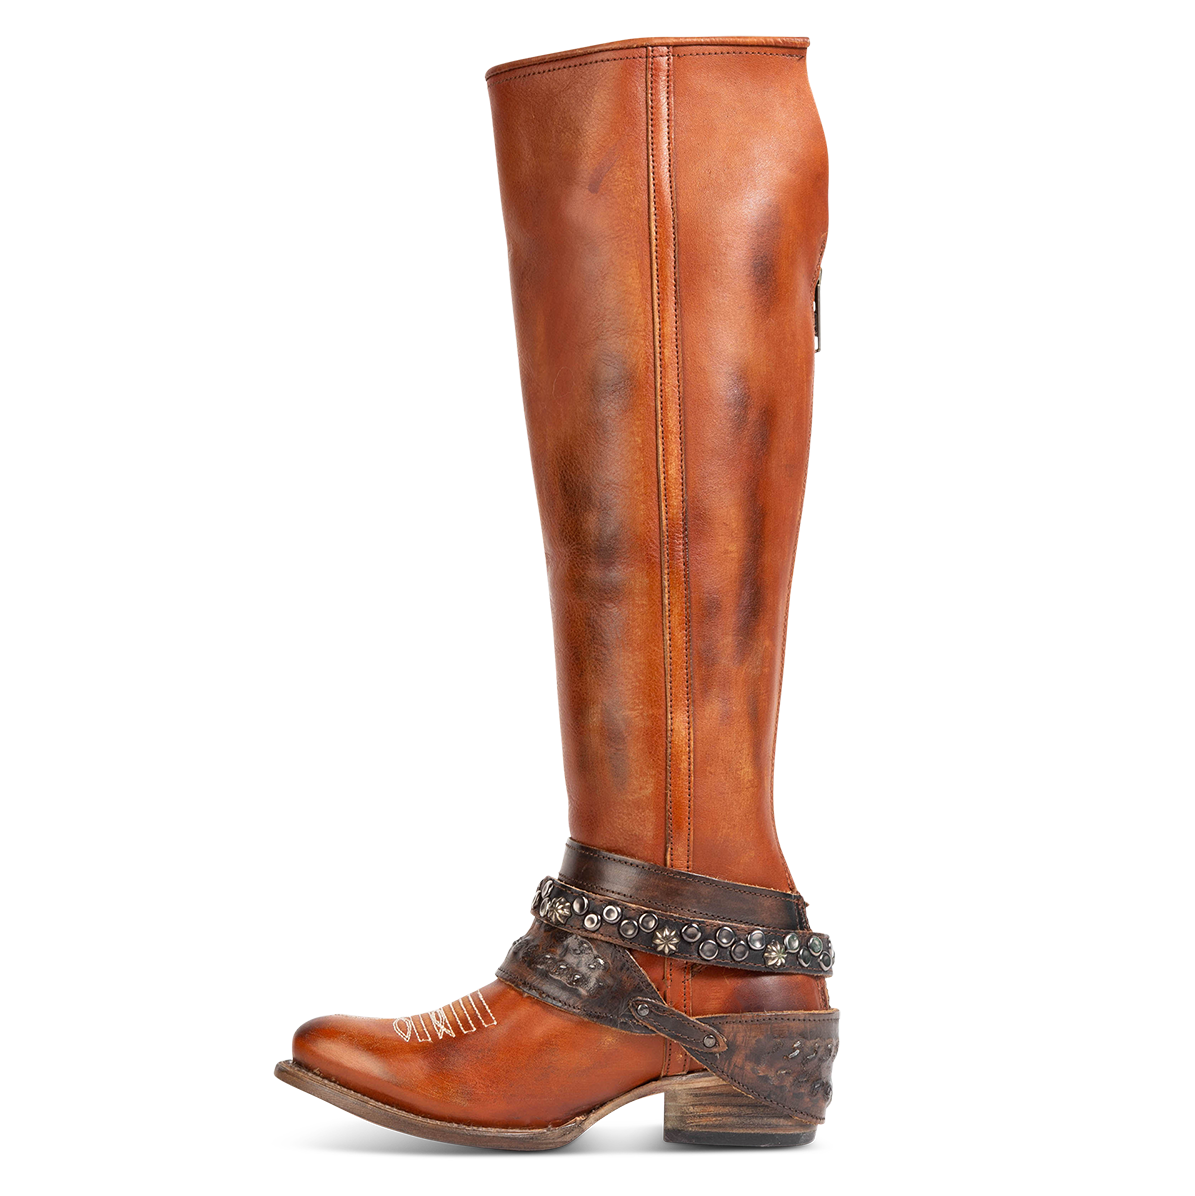 Inside view showing relaxed shaft, mixed metal buckles, and stud detailing on FREEBIRD women's Rodondo whiskey boot